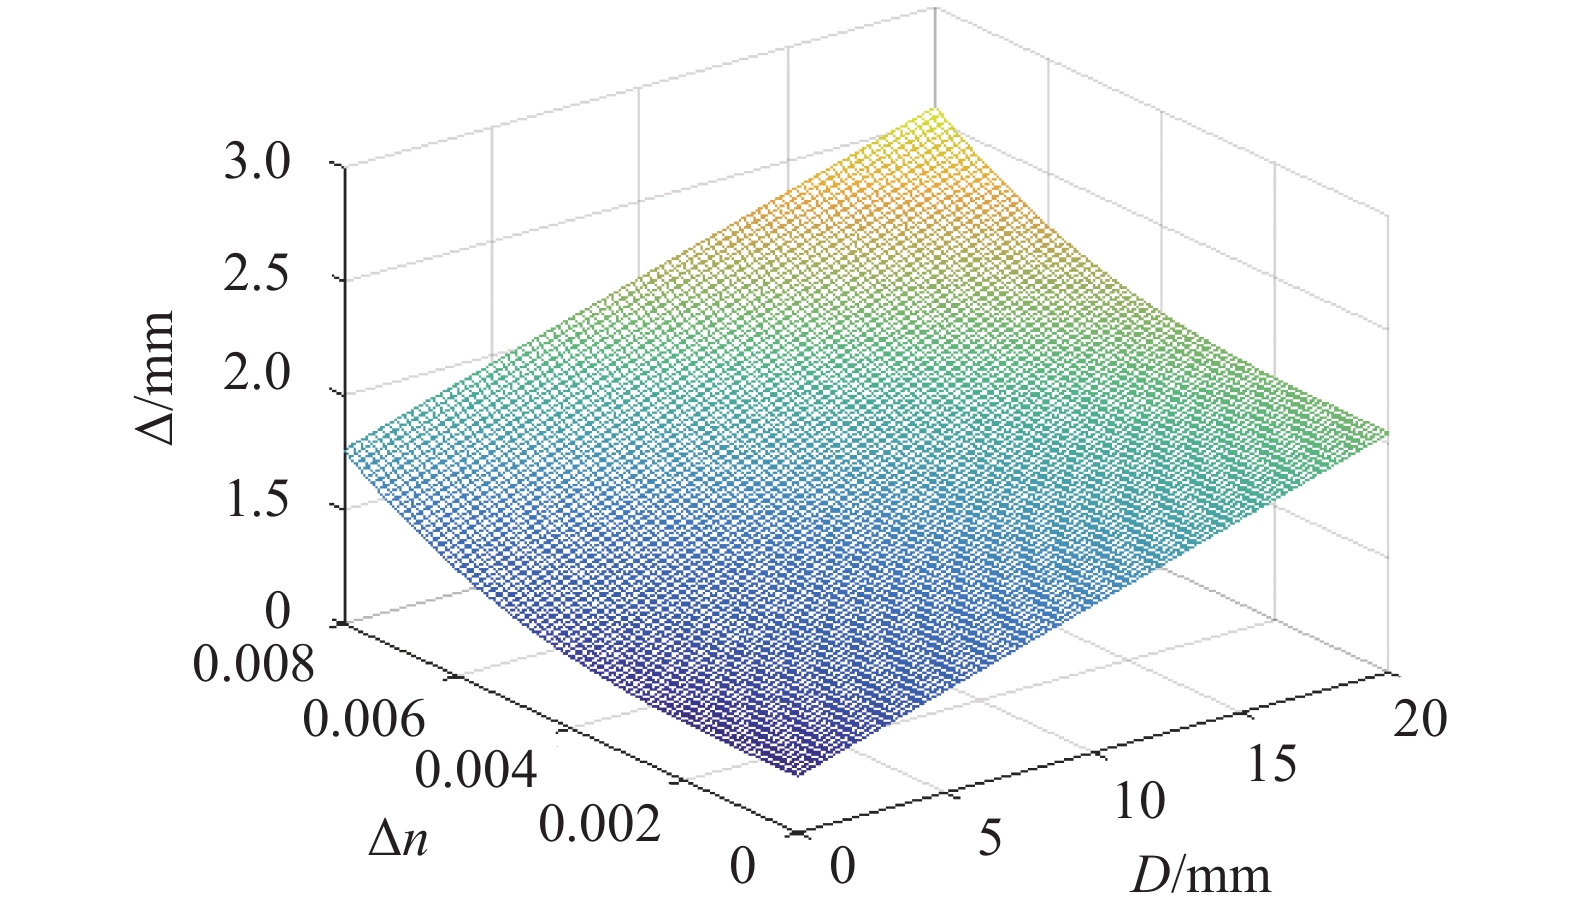 Distribution of maximum optical path difference under different parameter conditions